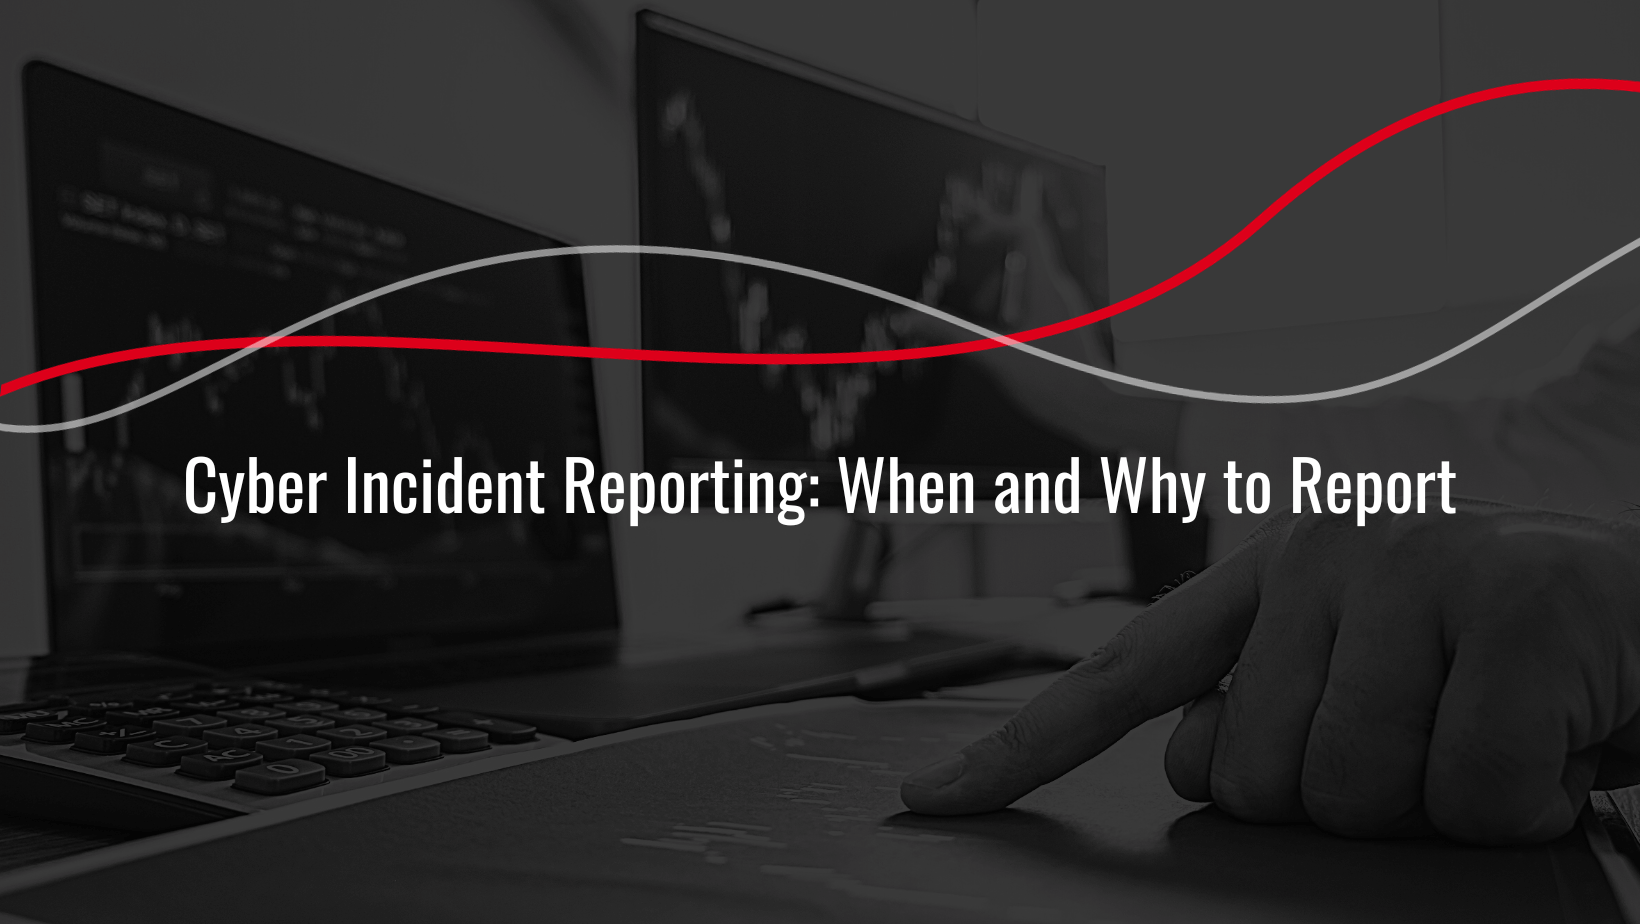 Cyber Incident Reporting: When and Why to Report